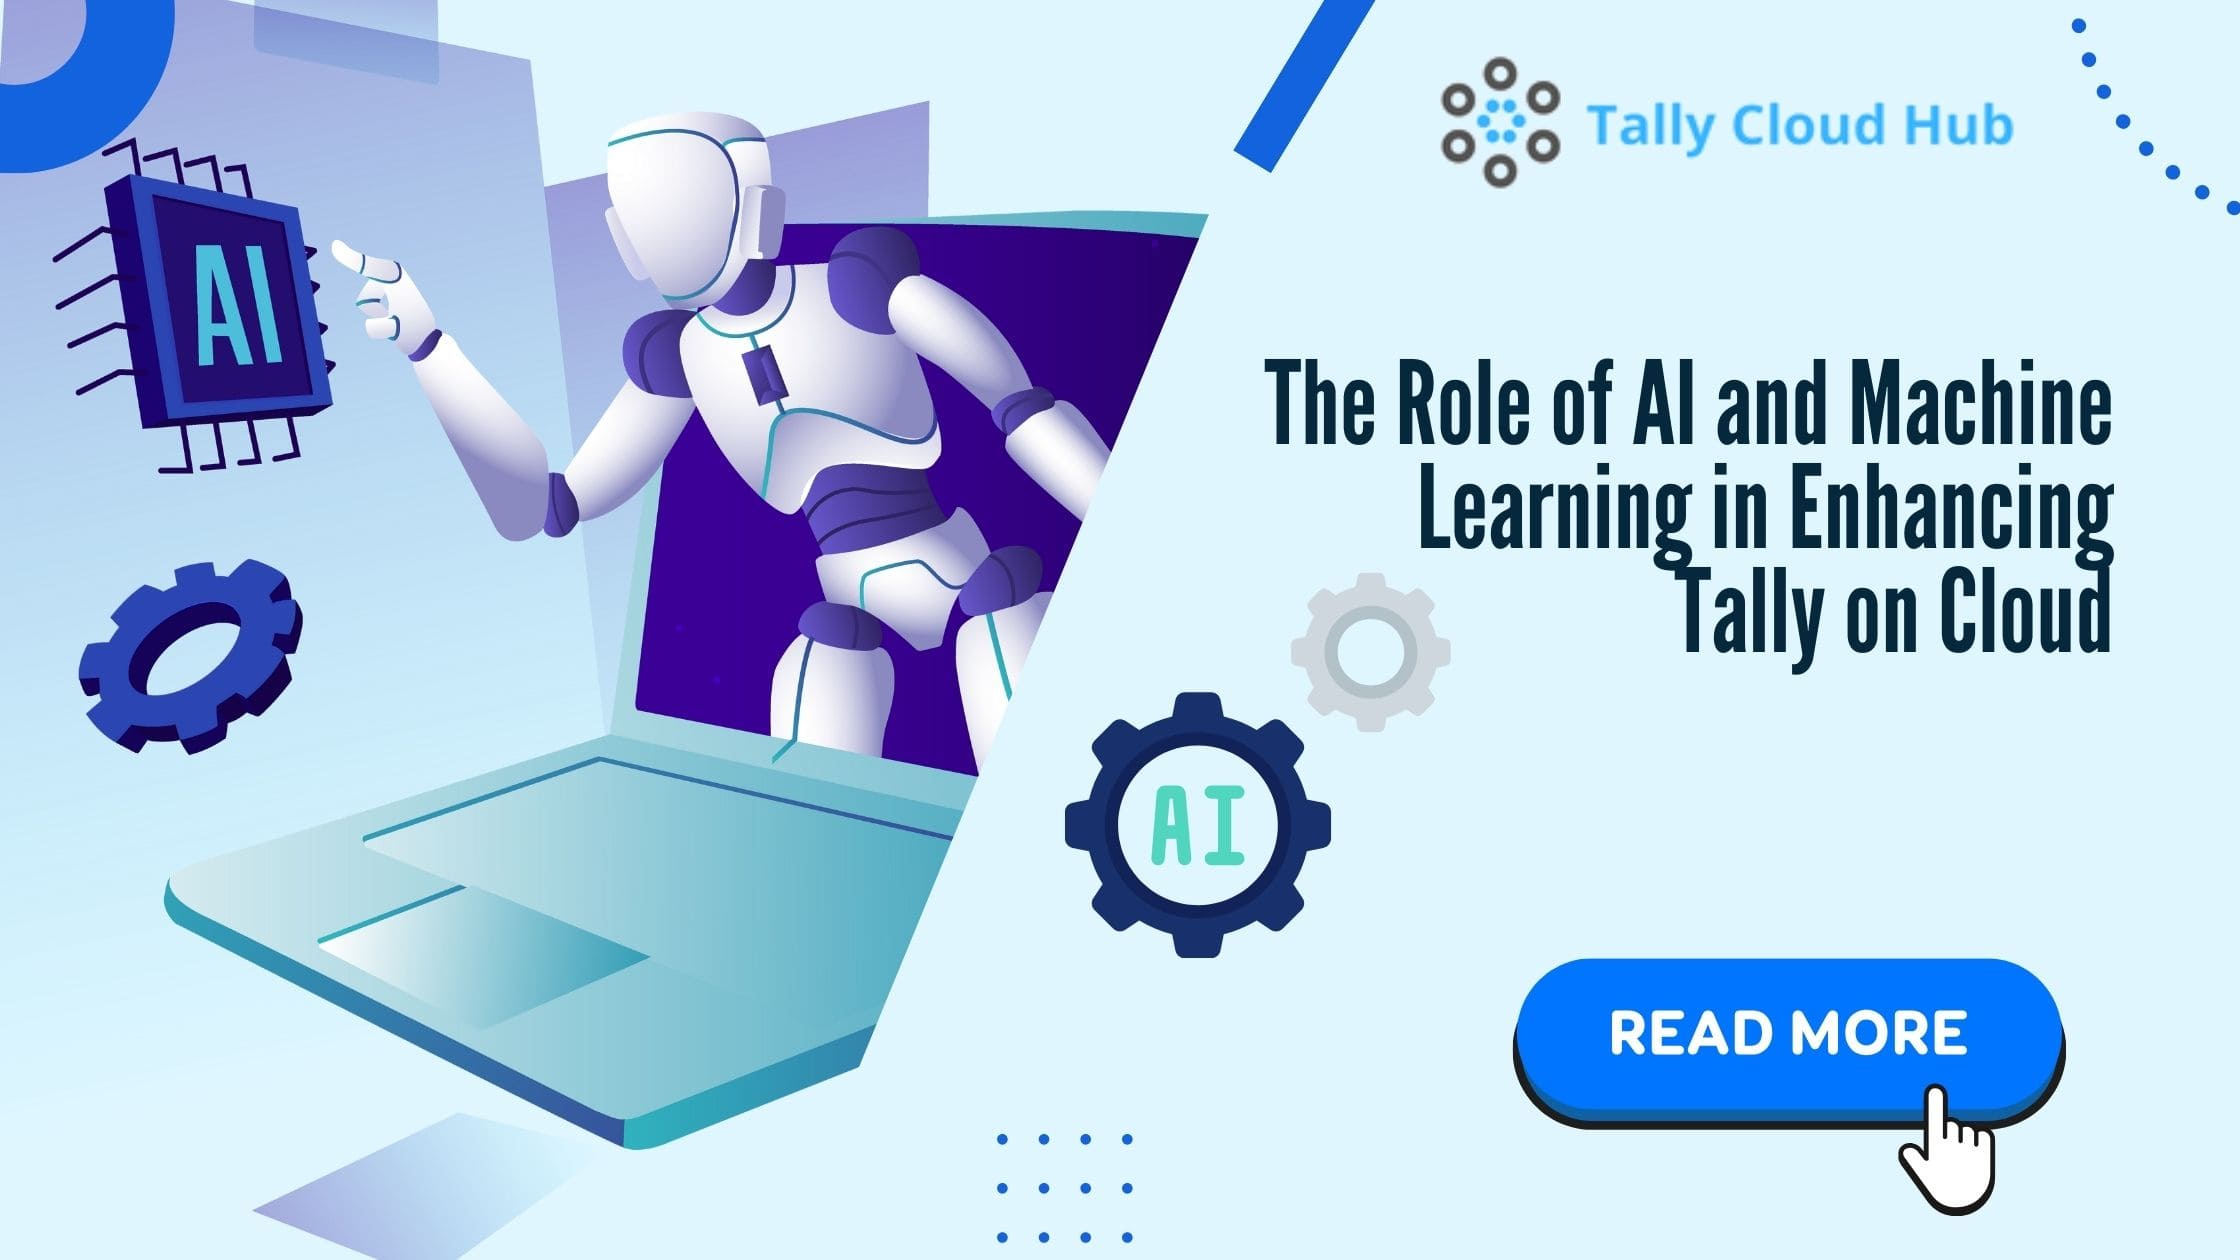 Explore how AI and Machine Learning revolutionize Tally on Cloud.